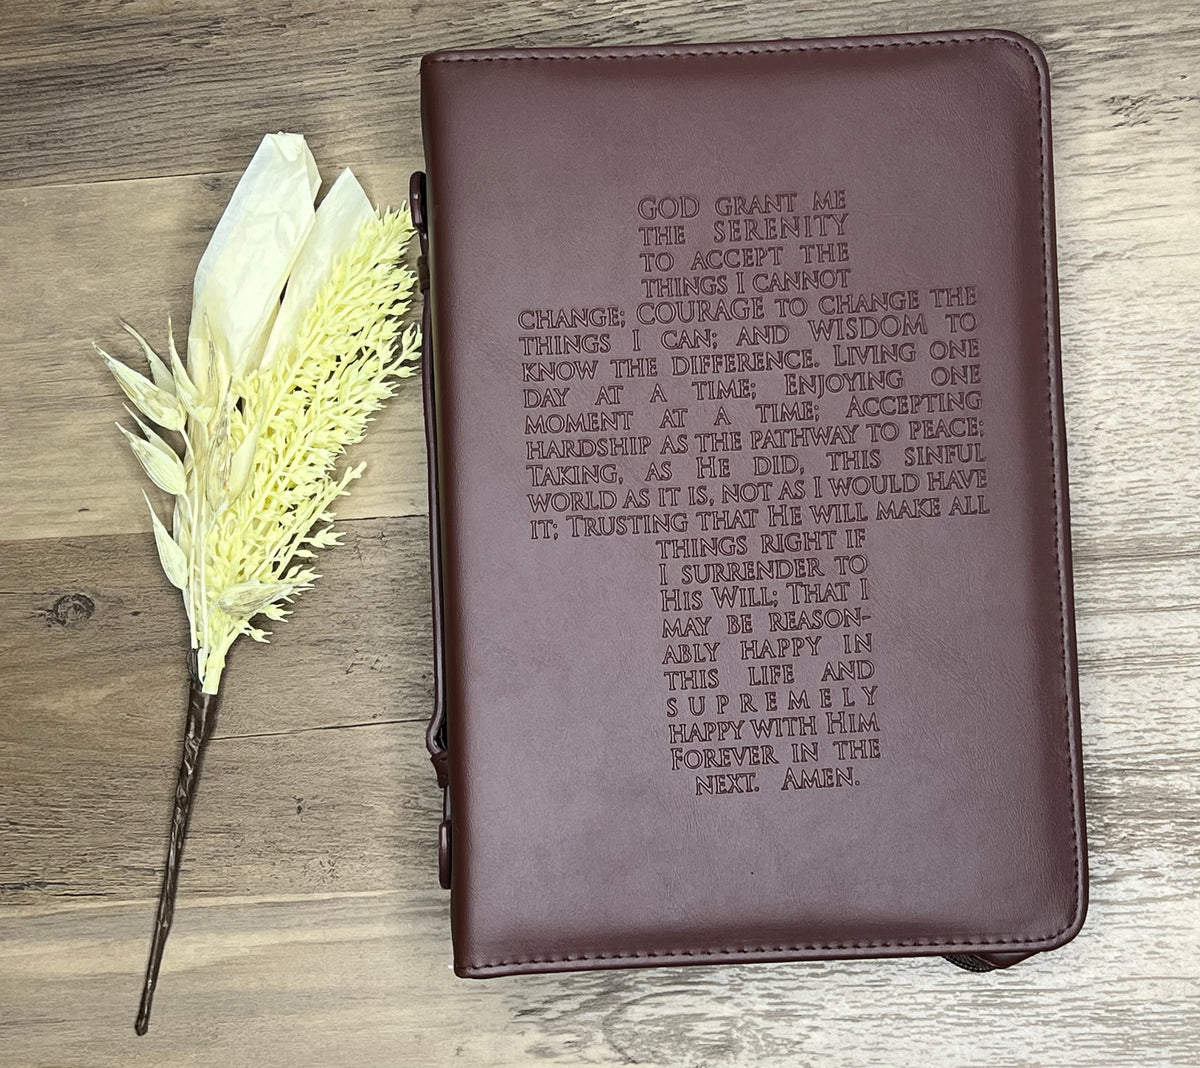 Grant Me Bible Cover